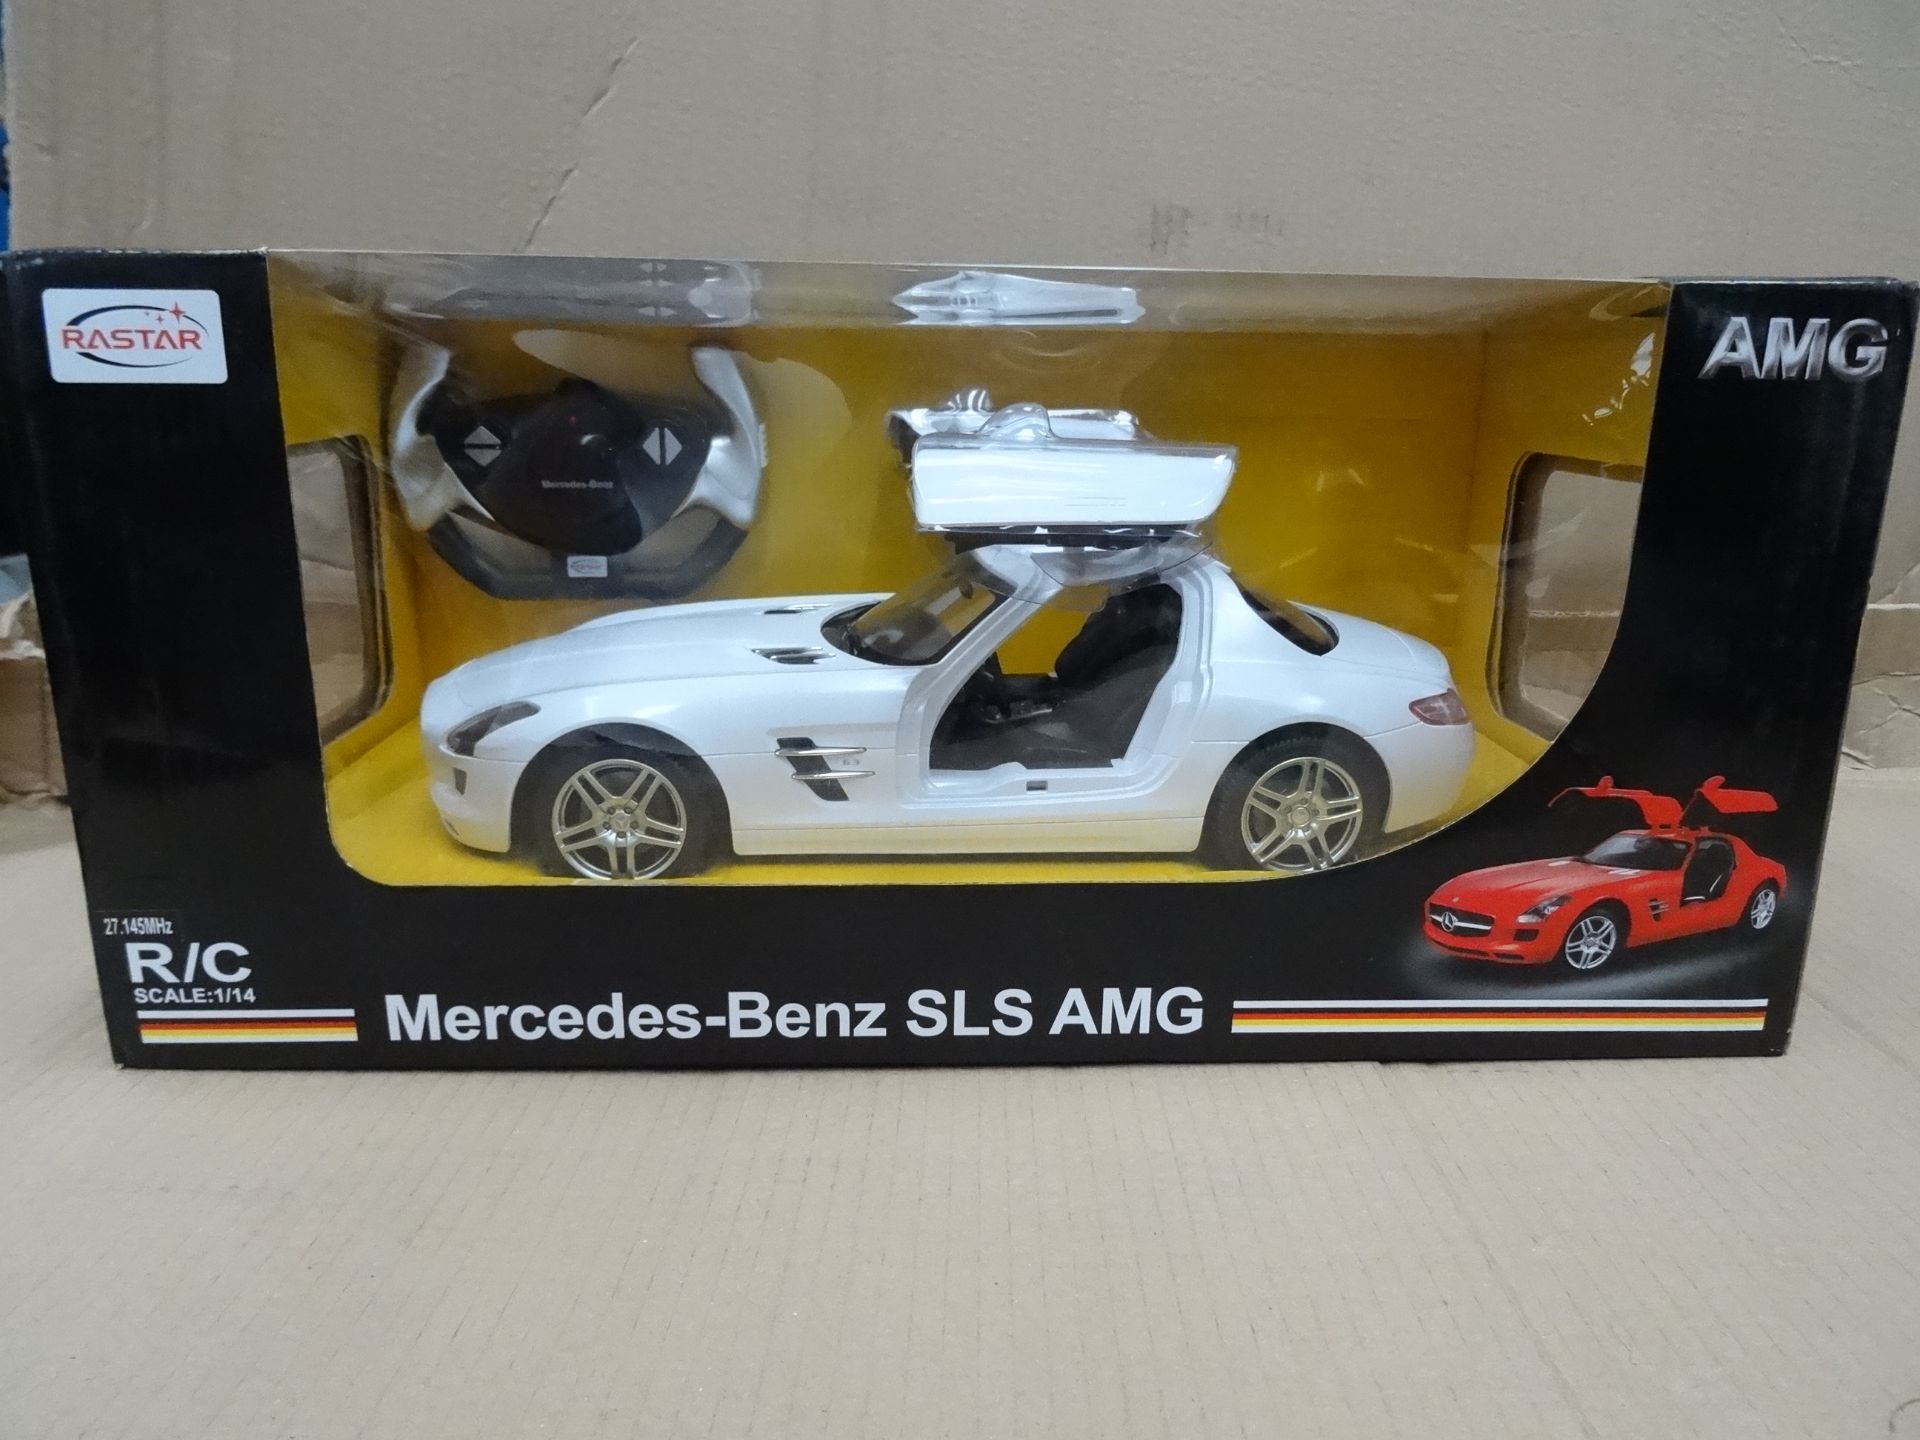 1 x Official Mercedes Benz SLS AMG Remote Control Car. RRP £70! Brand new and Boxed! Scale 1/14!